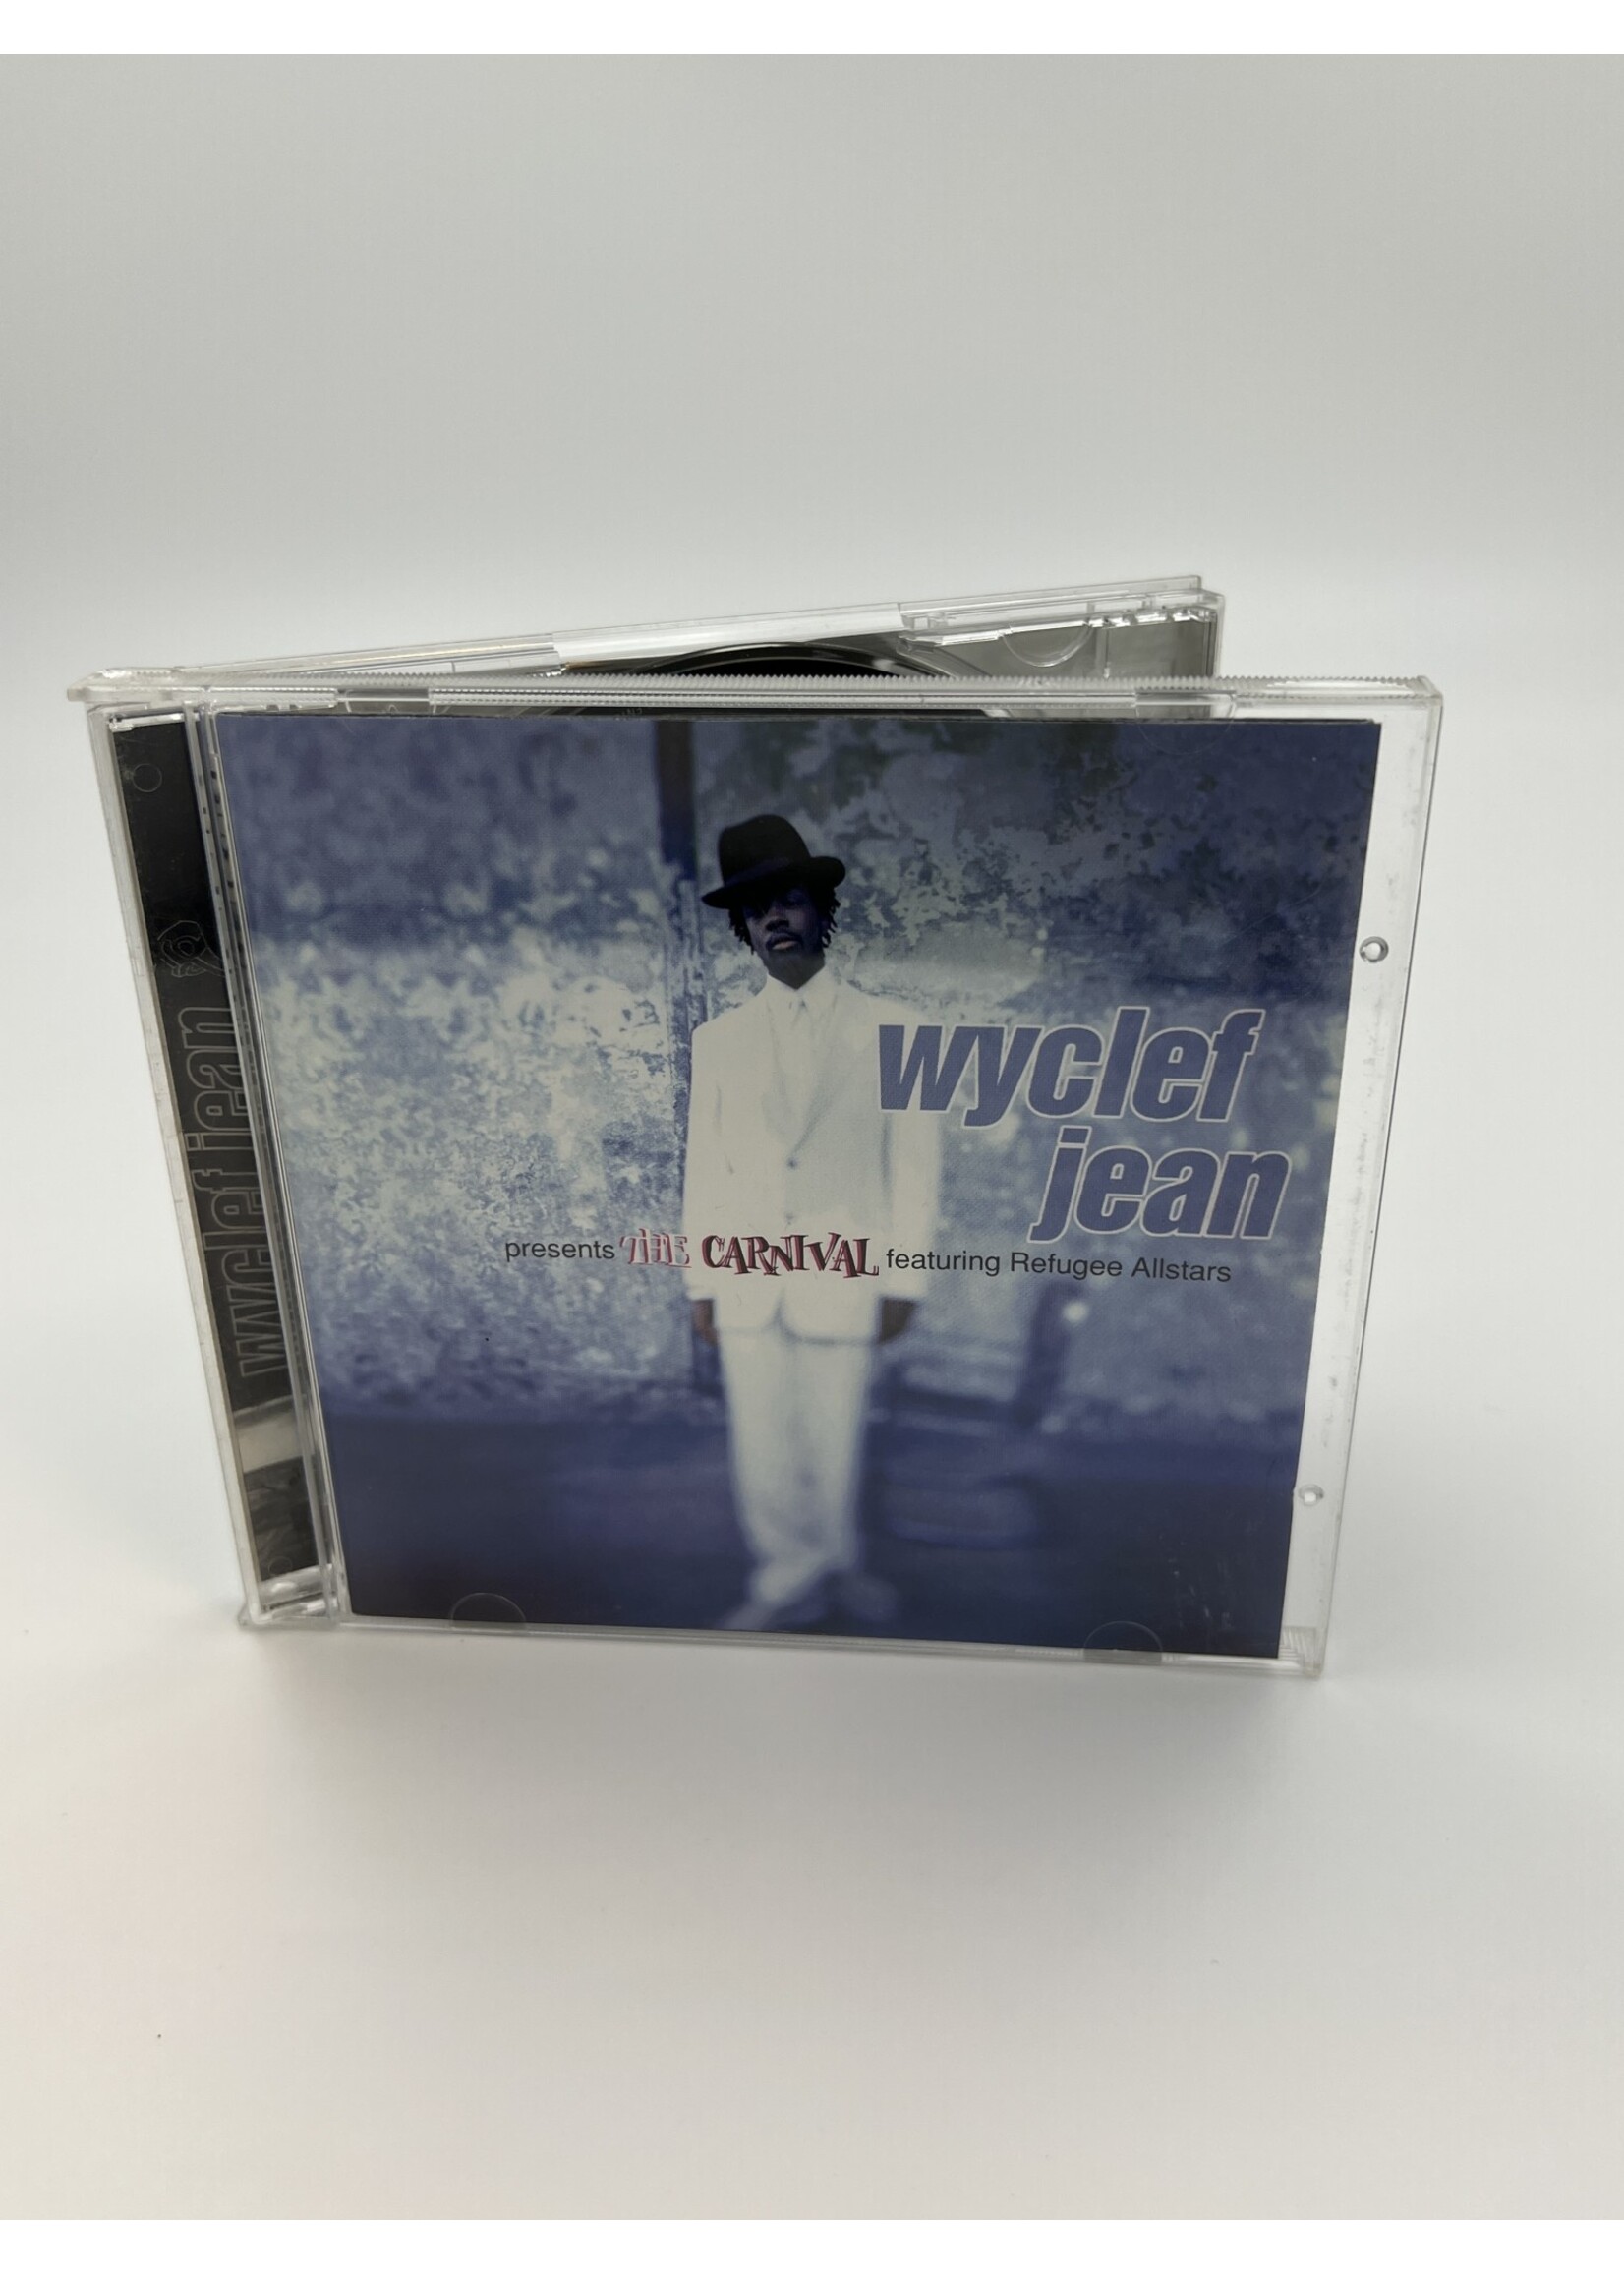 CD Wyclef Jean Presents The Carnival Featuring Refugee Allstars CD